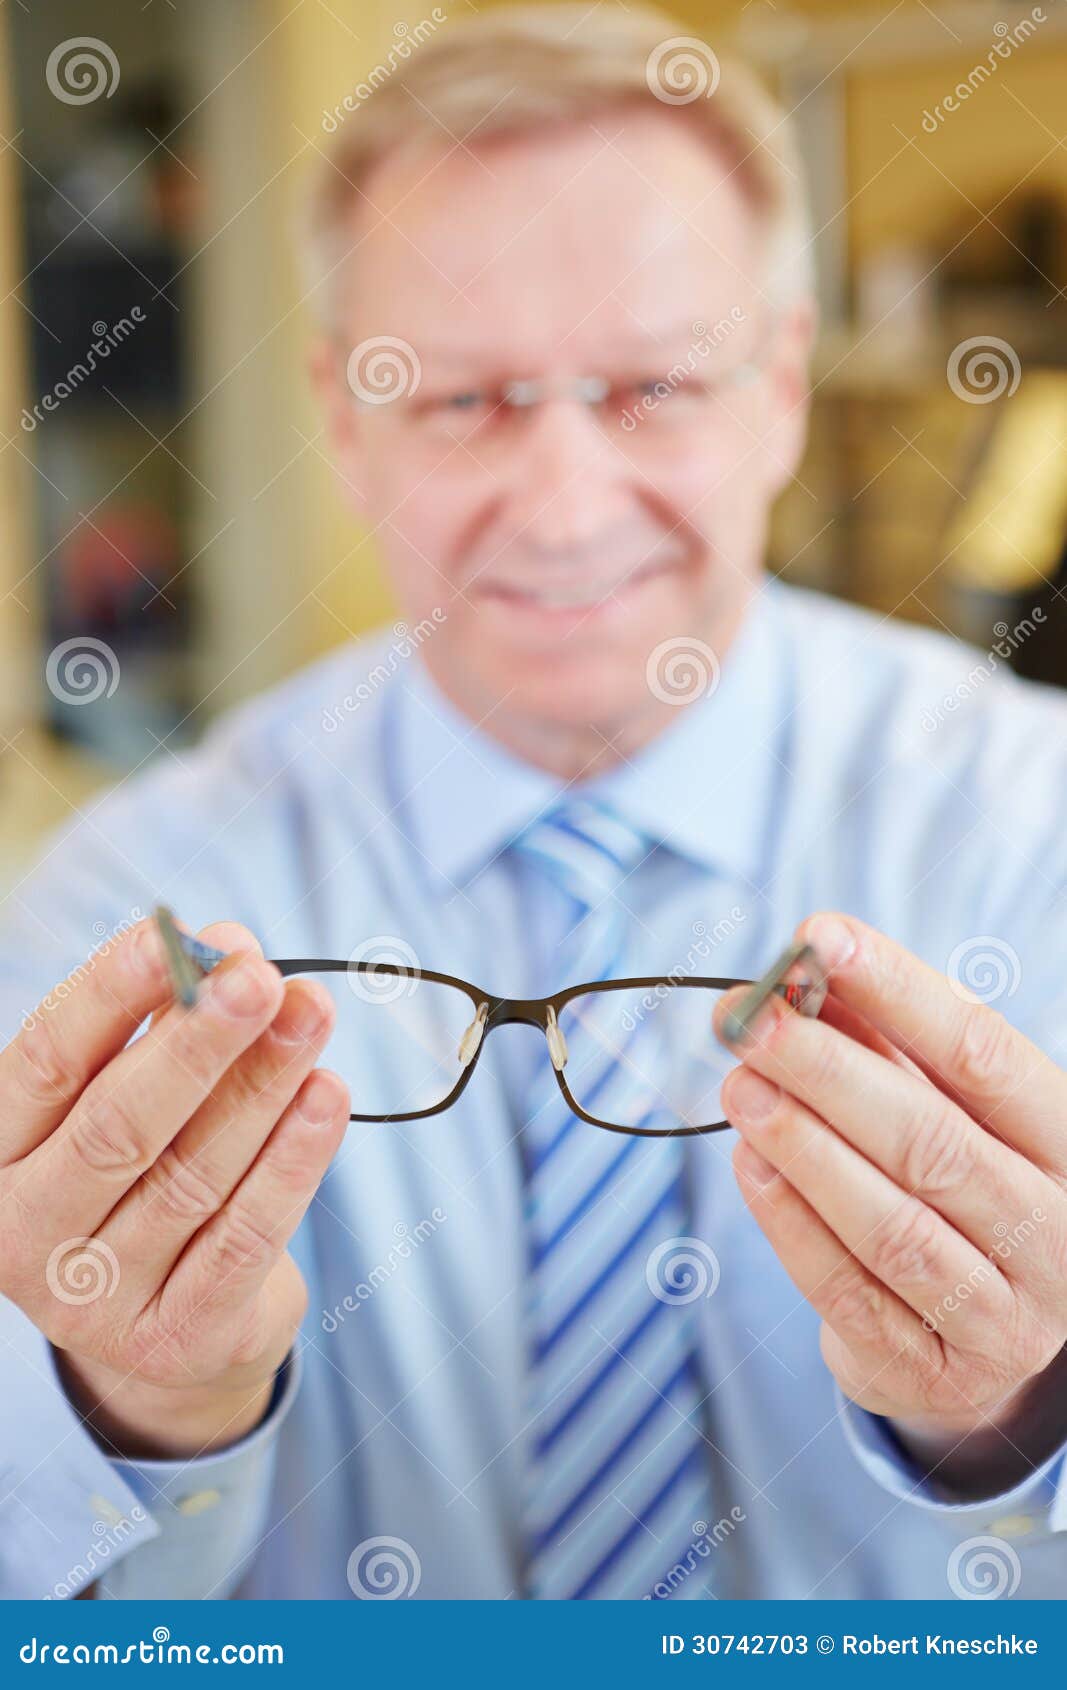 Optician Holding Glasses at Stock Image - Image of offer, glasses: 30742703